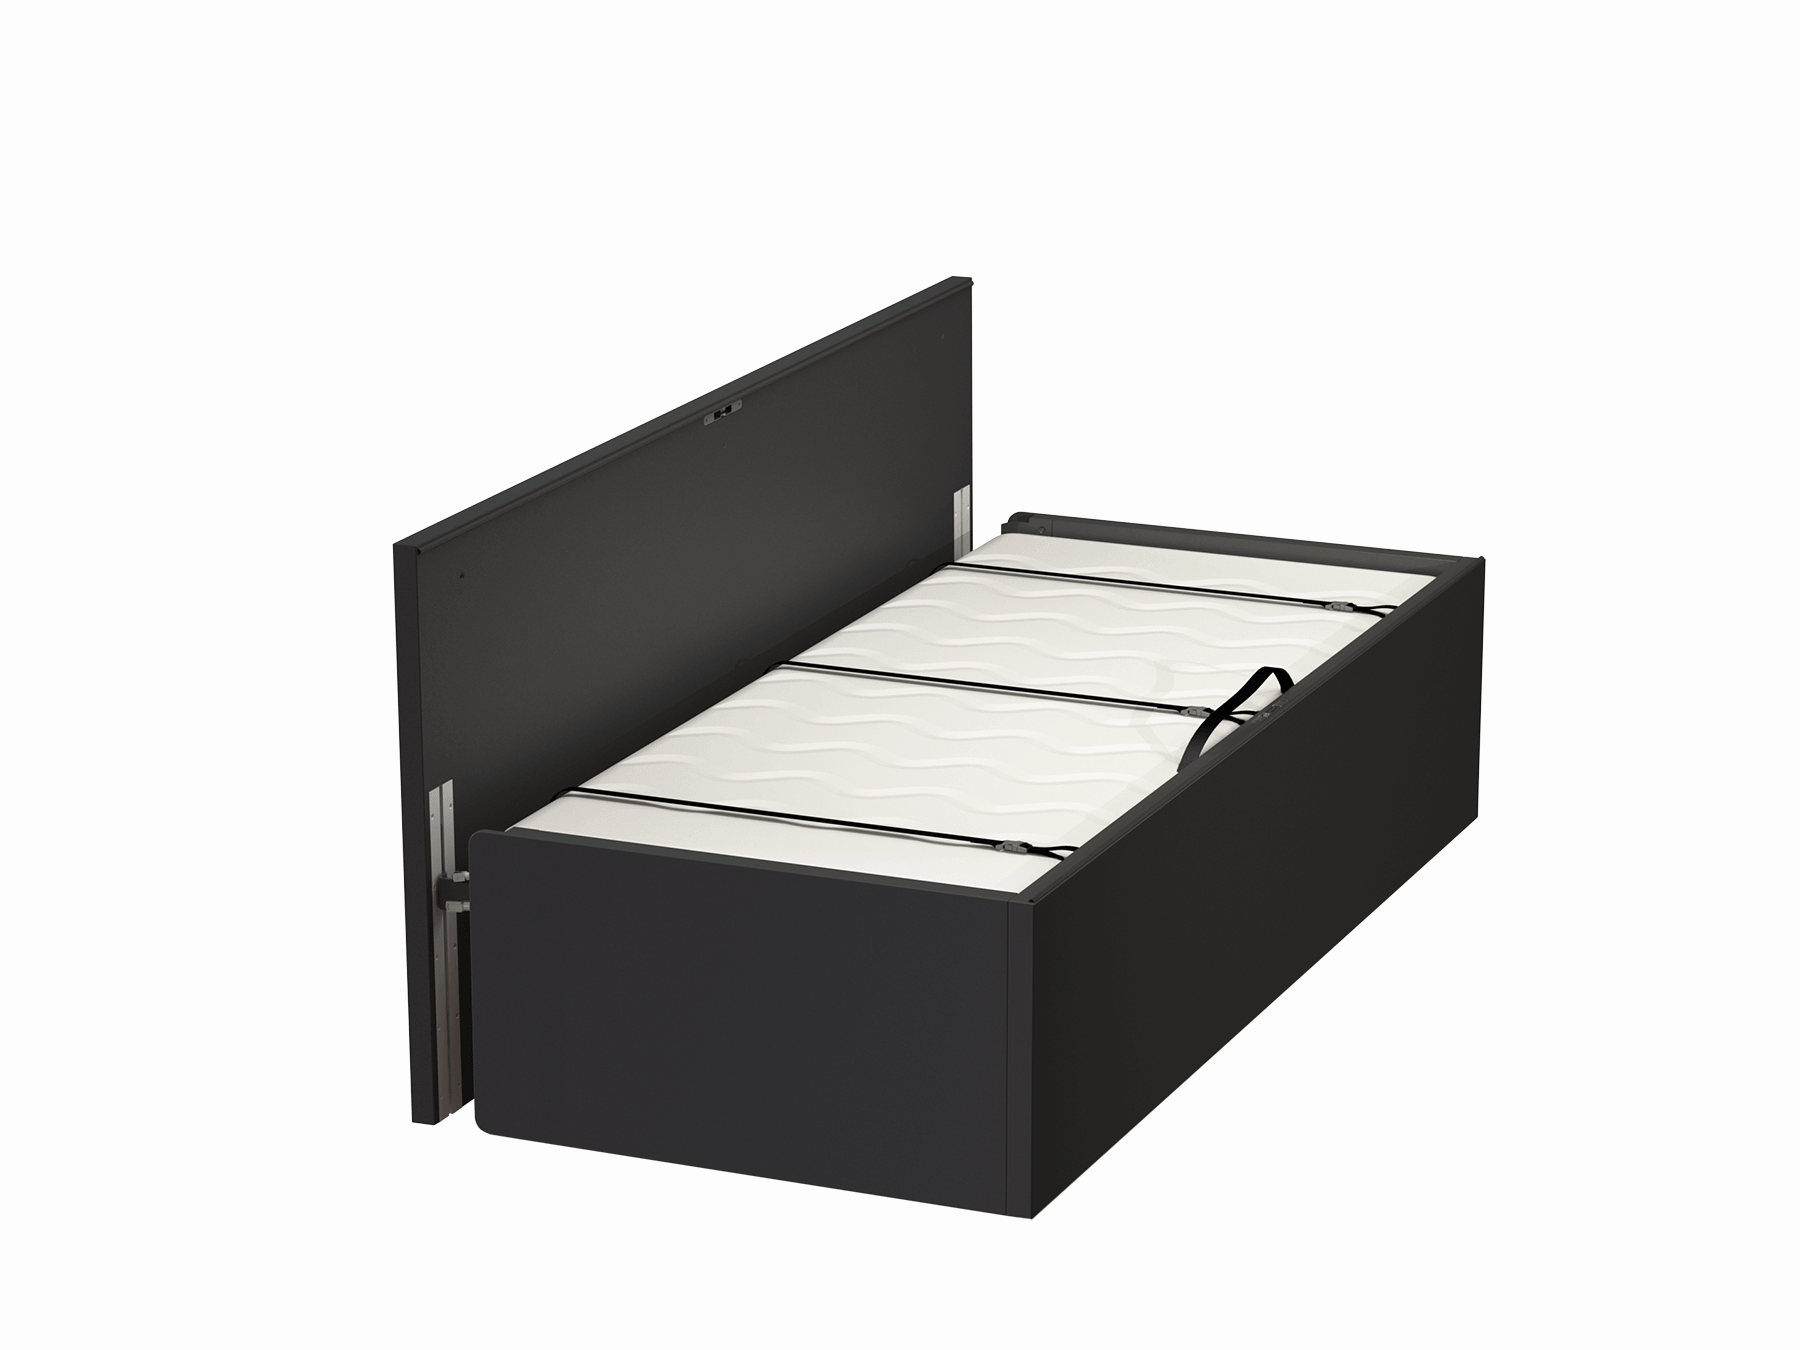 Wall-mounted Tablebed Single – Black